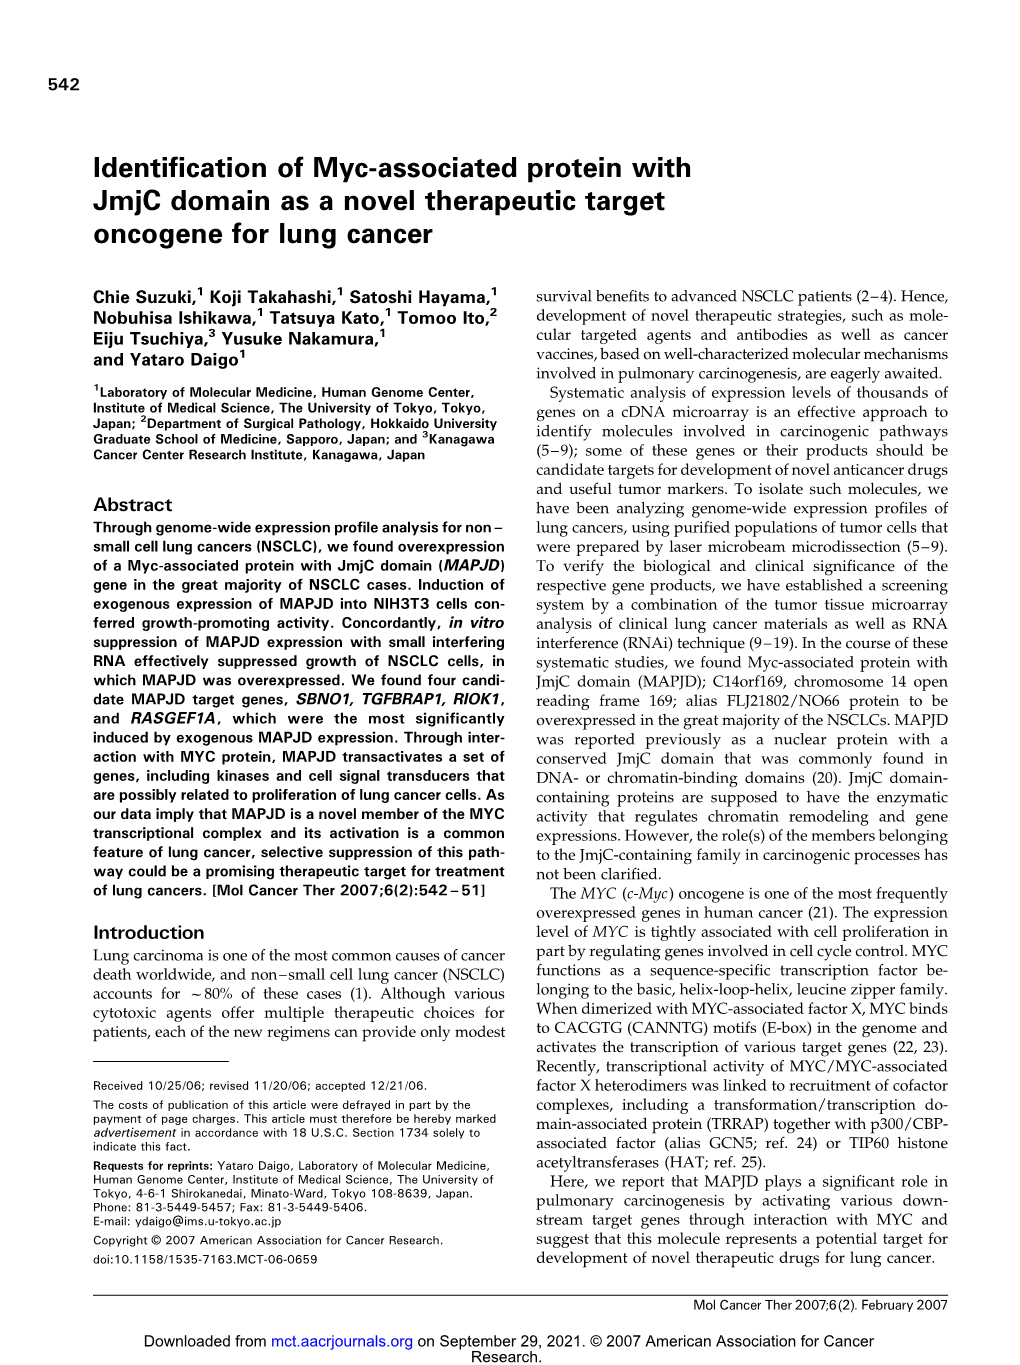 Identification of Myc-Associated Protein with Jmjc Domain As a Novel Therapeutic Target Oncogene for Lung Cancer